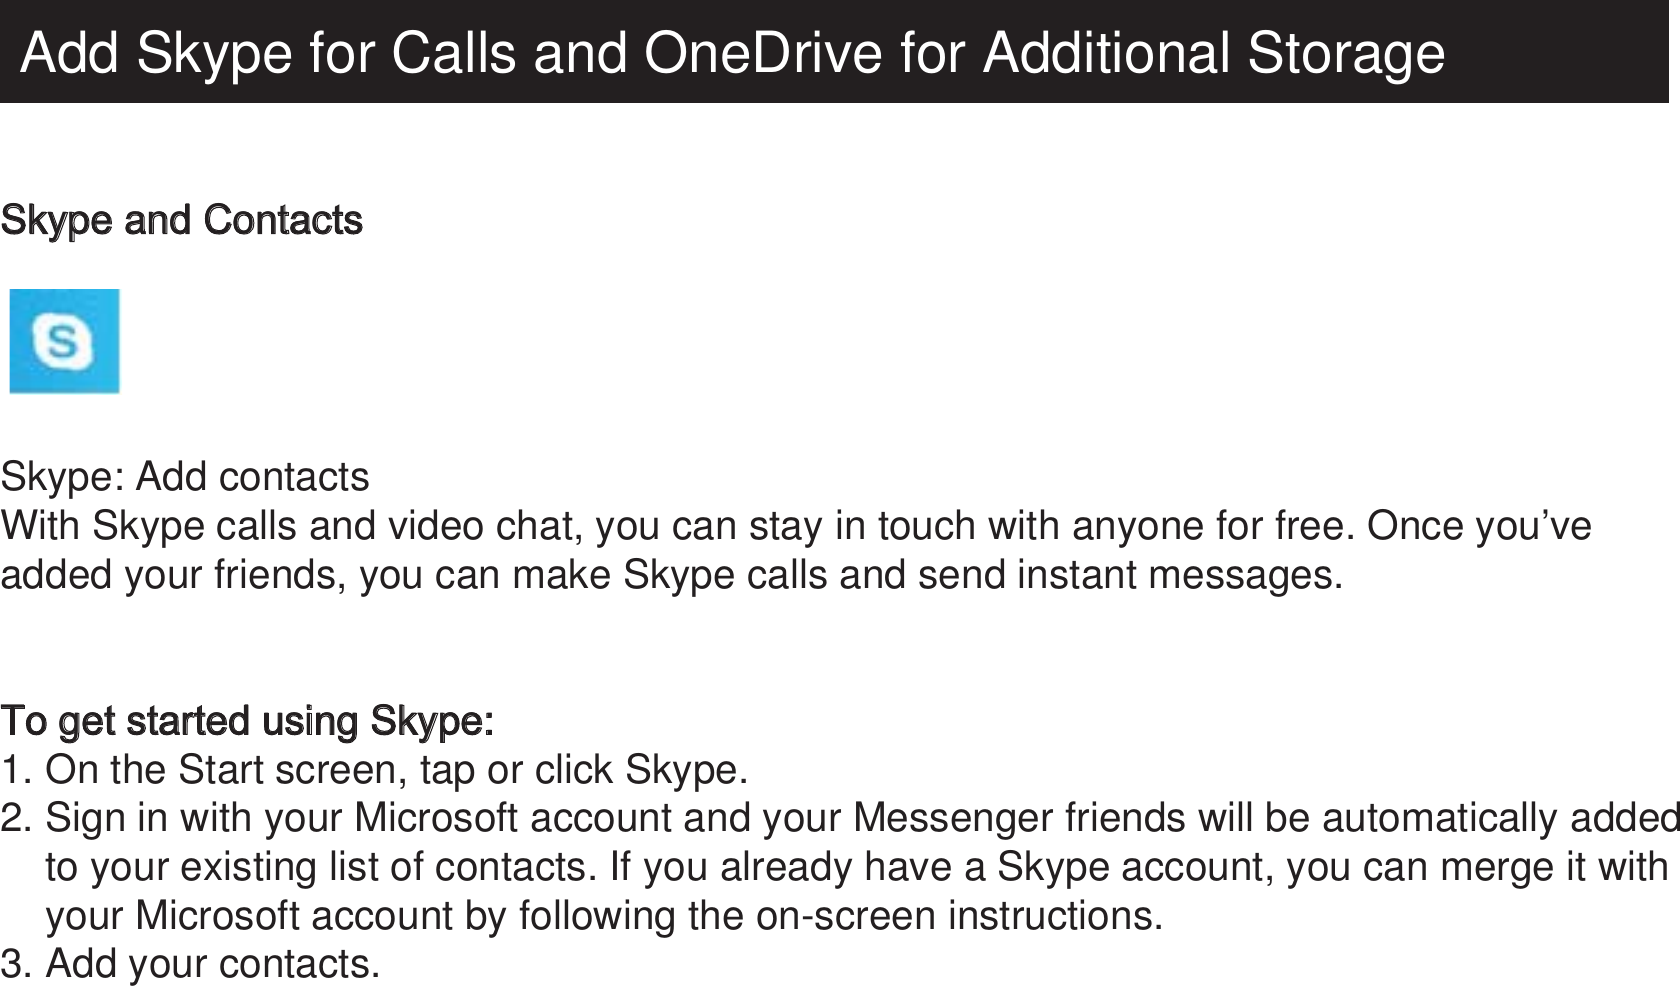 Add Skype for Calls and OneDrive for Additional StorageSkype and Contacts  Skype: Add contactsWith Skype calls and video chat, you can stay in touch with anyone for free. Once you’ve added your friends, you can make Skype calls and send instant messages.To get started using Skype:1. On the Start screen, tap or click Skype.2. Sign in with your Microsoft account and your Messenger friends will be automatically added     to your existing list of contacts. If you already have a Skype account, you can merge it with     your Microsoft account by following the on-screen instructions.3. Add your contacts.